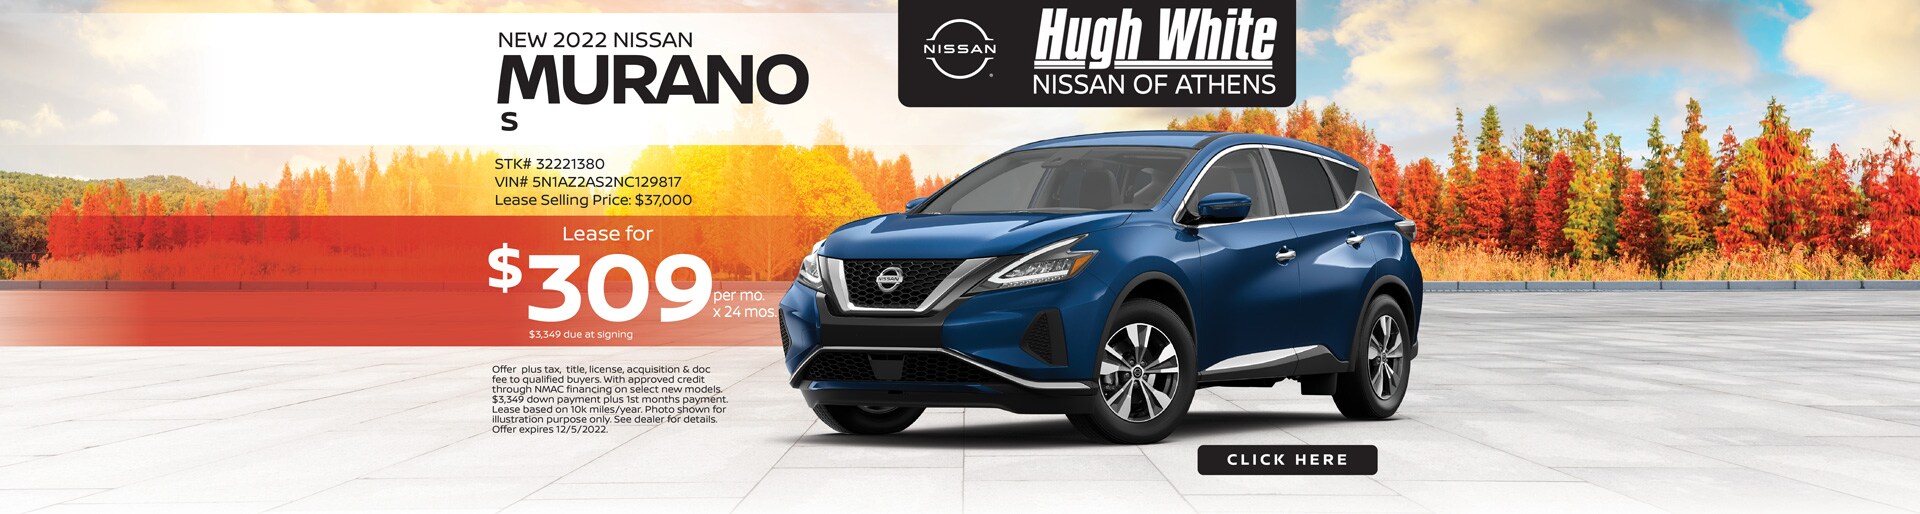 2022 Nissan Murano Lease Offer | Hugh White Nissan Athens